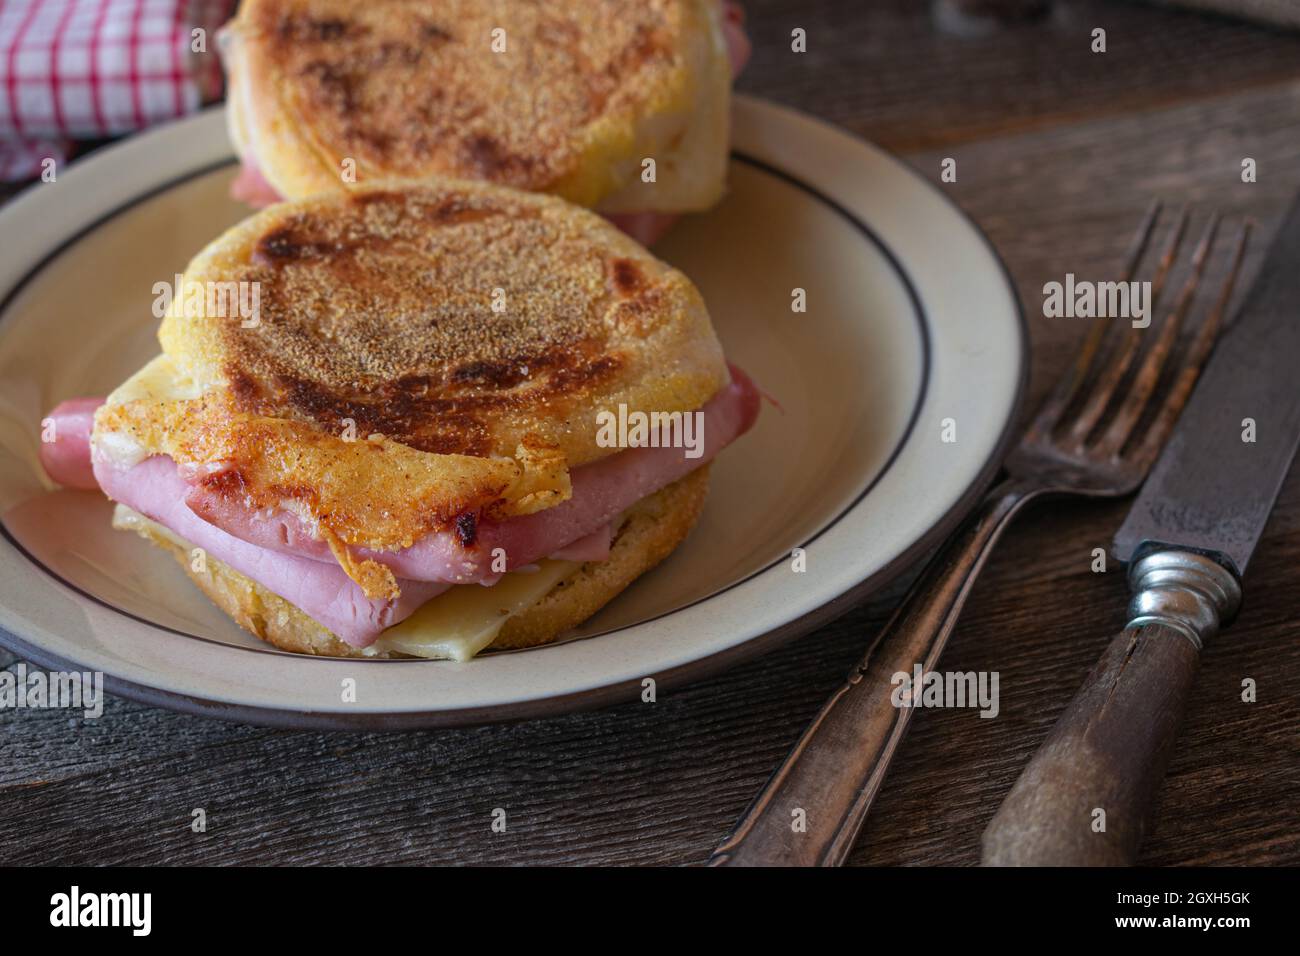 Grilled Ham and cheese sandwich made with english muffin. Stock Photo